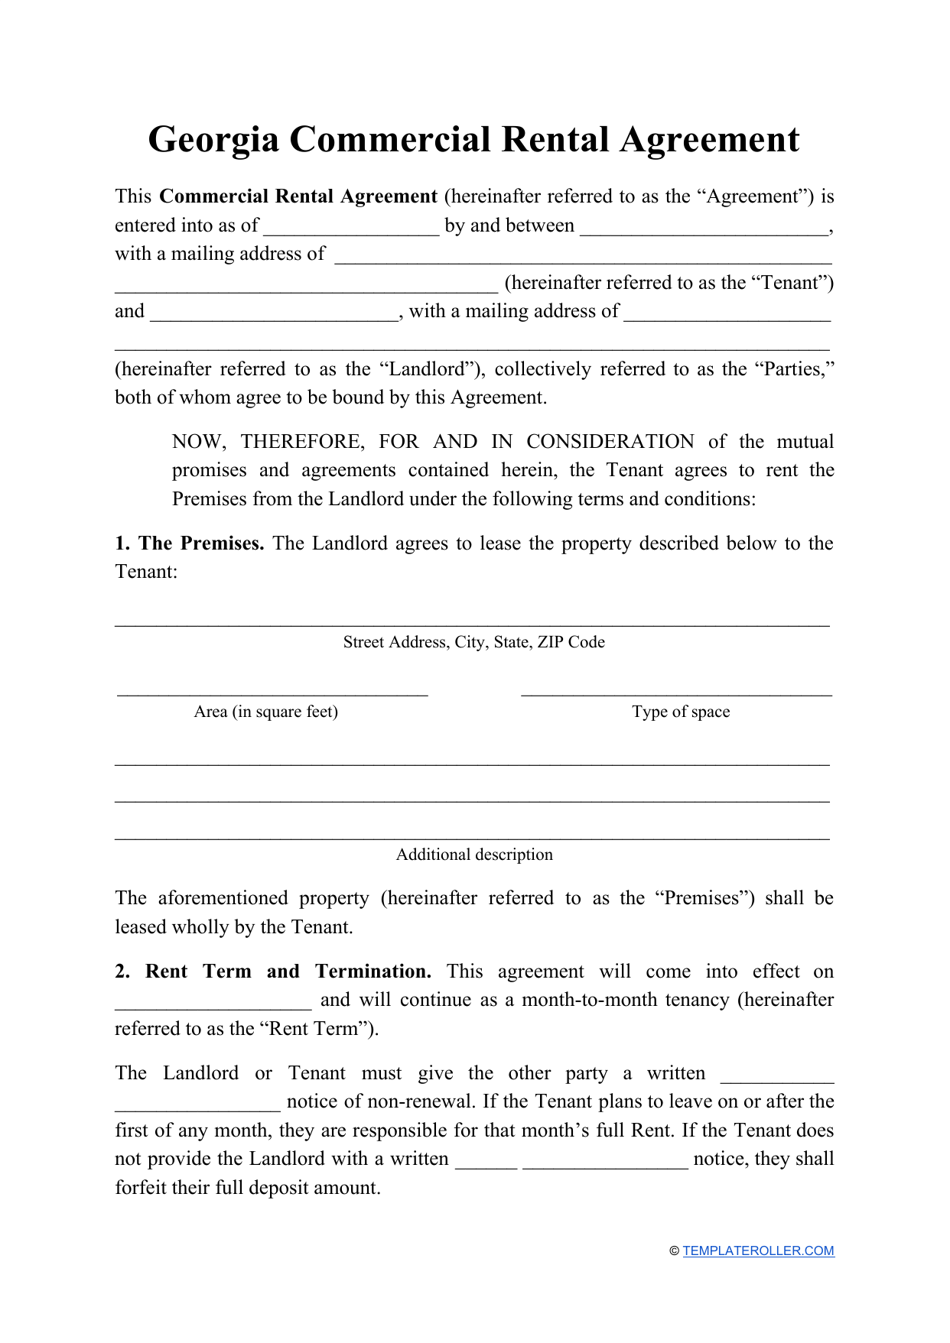 georgia united states commercial rental agreement